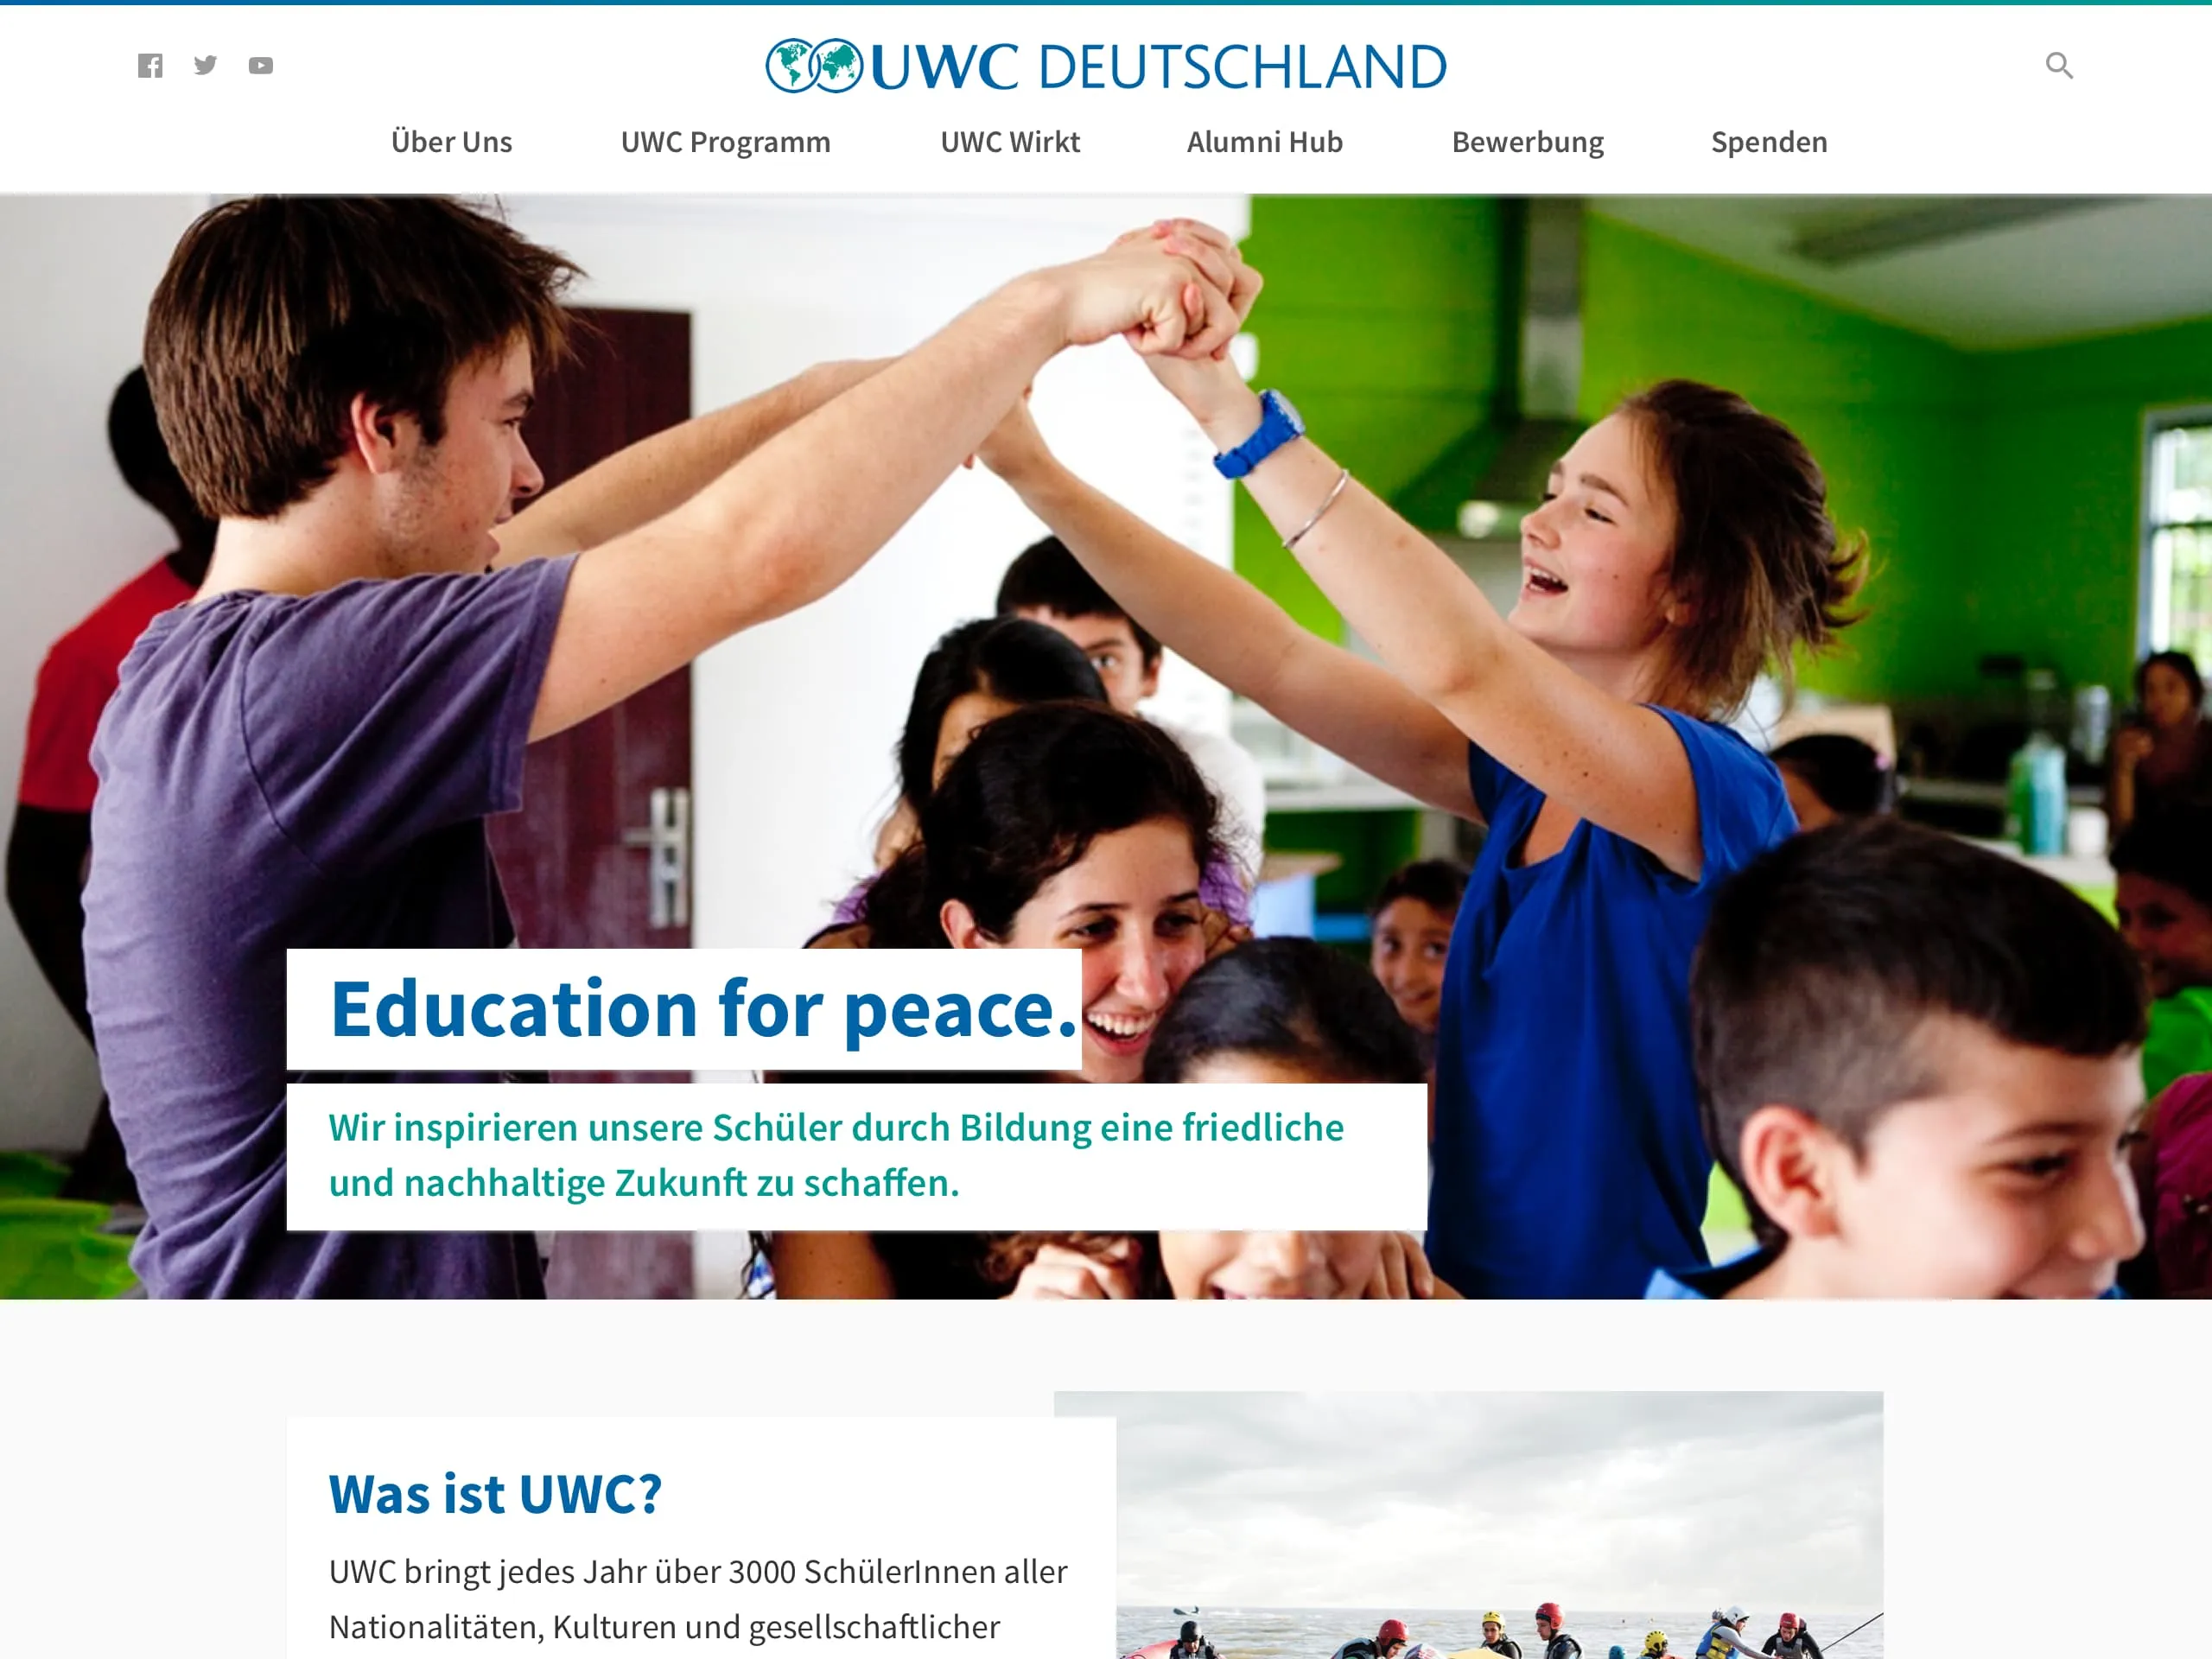 Third mockup of uwc.de. The headline and subheadline have a white background for better legibility, and the logo in the navigation bar is larger